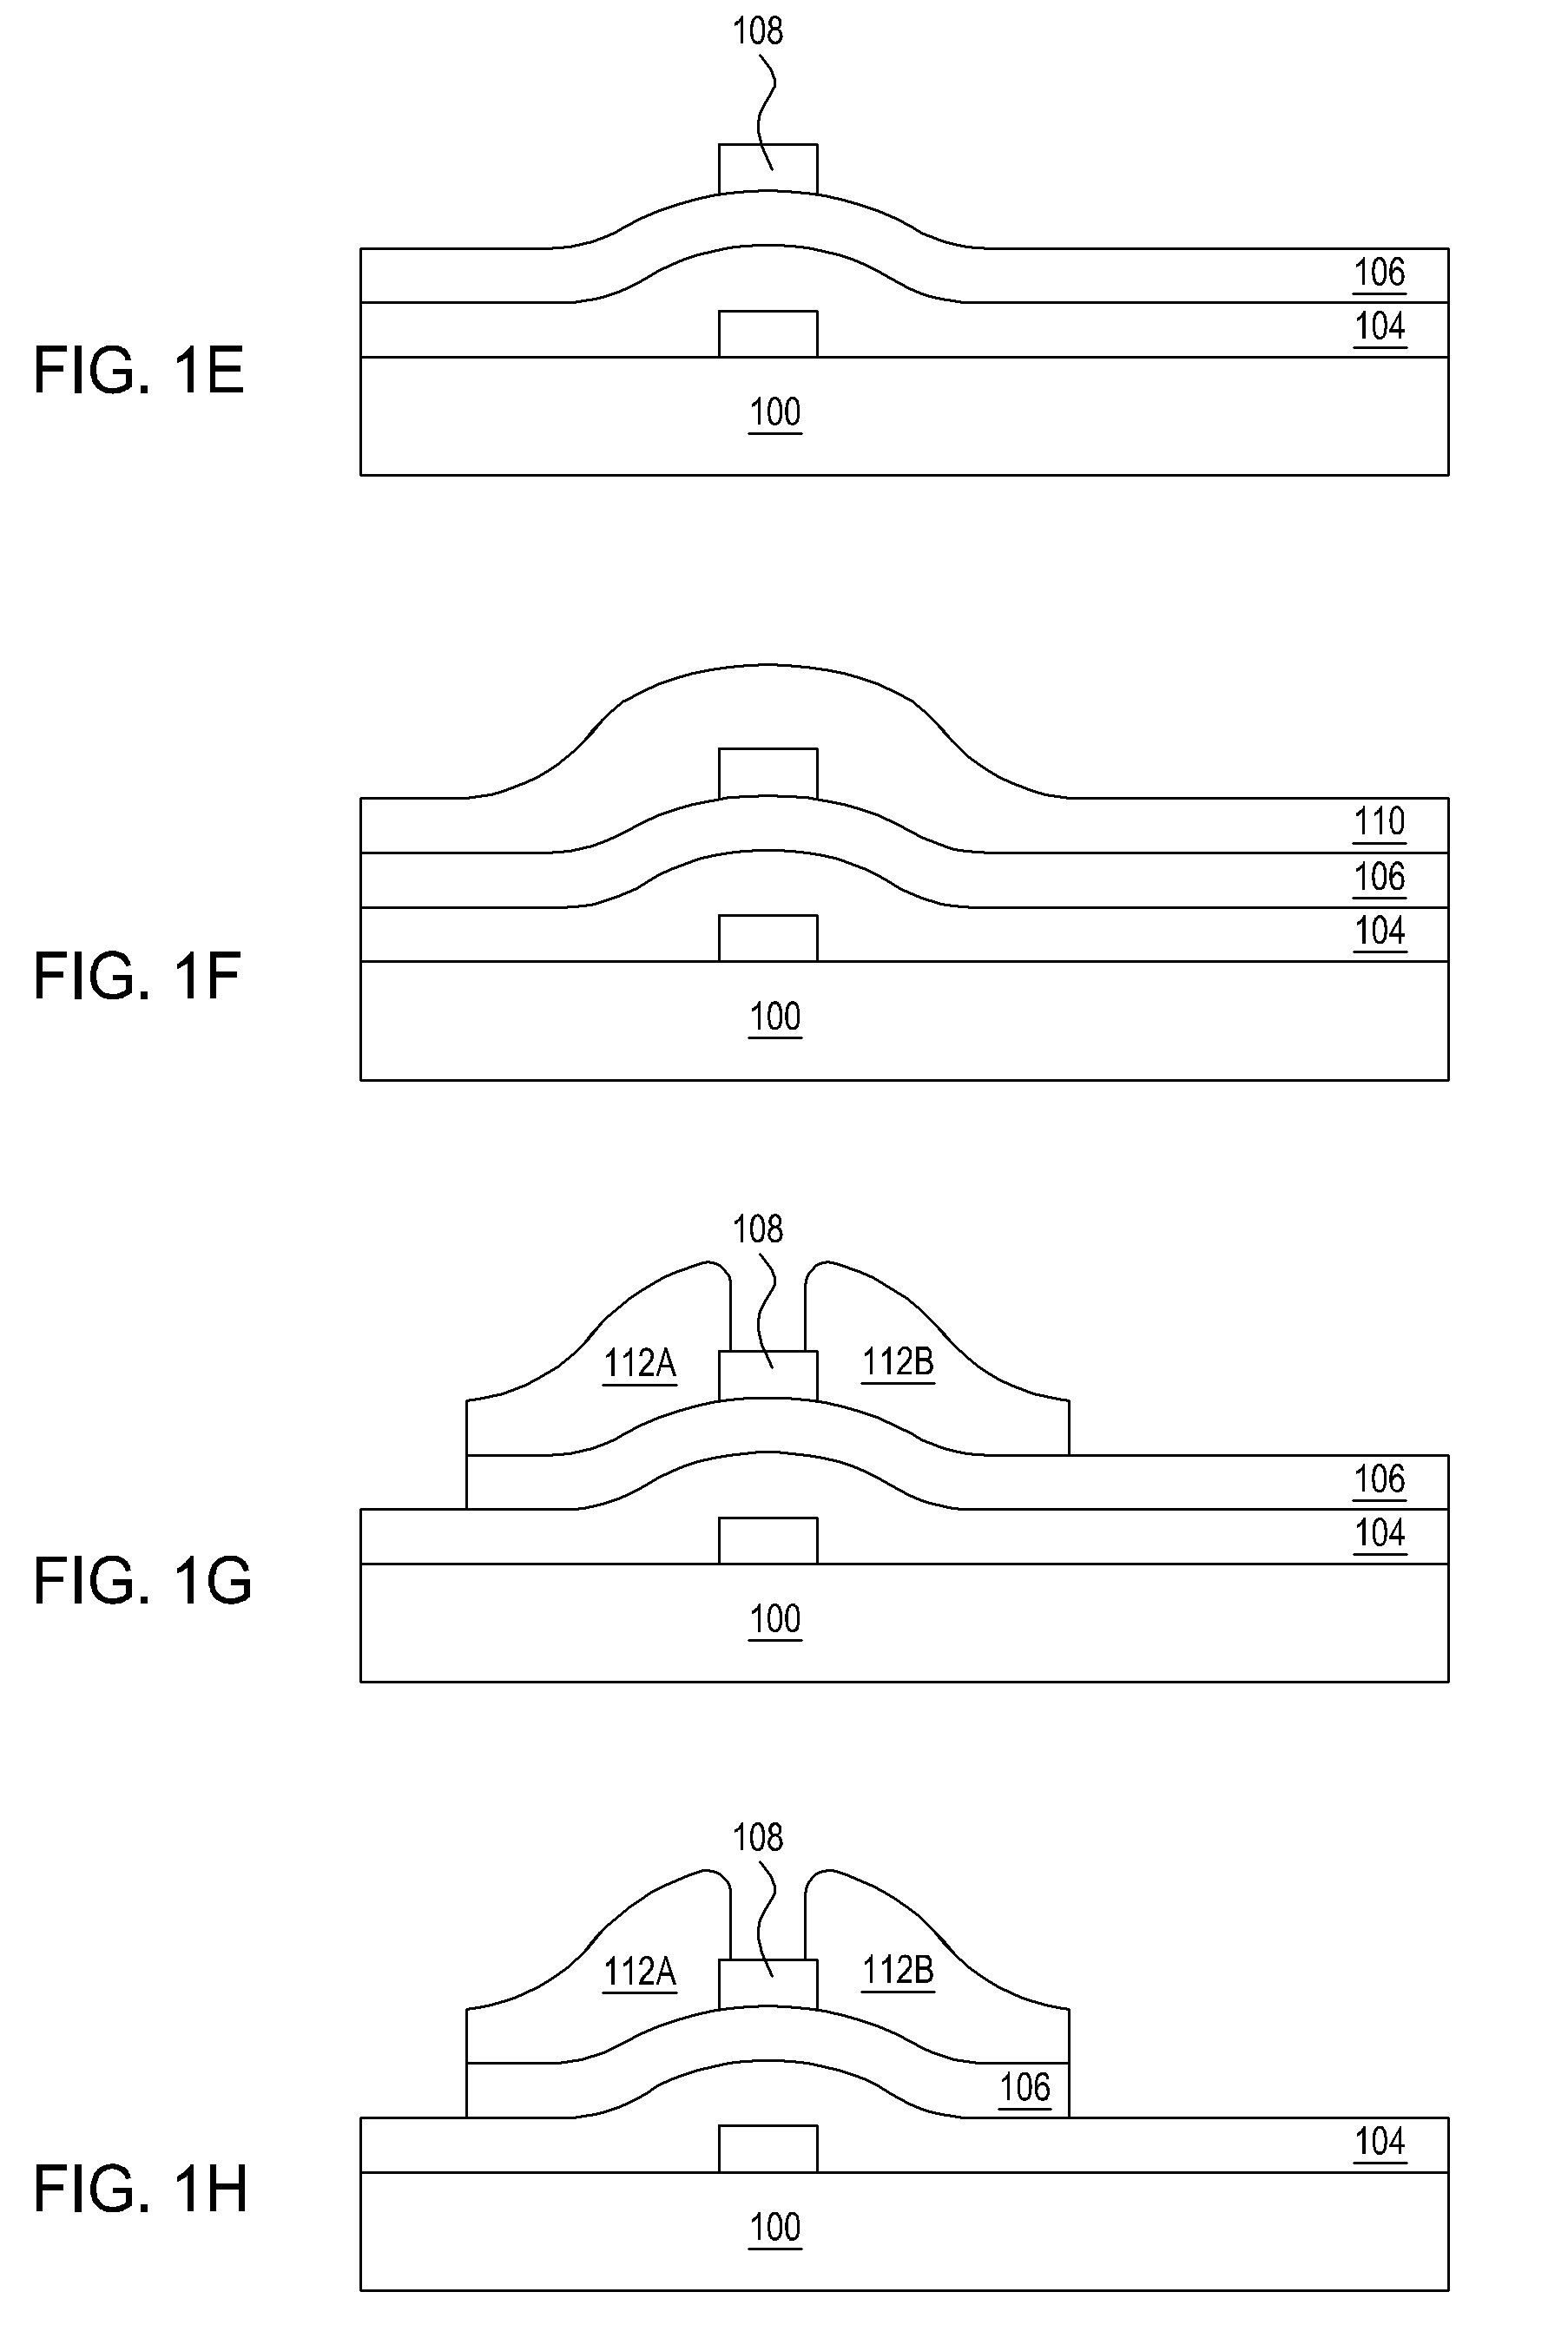 Process to make metal oxide thin film transistor array with etch stopping layer